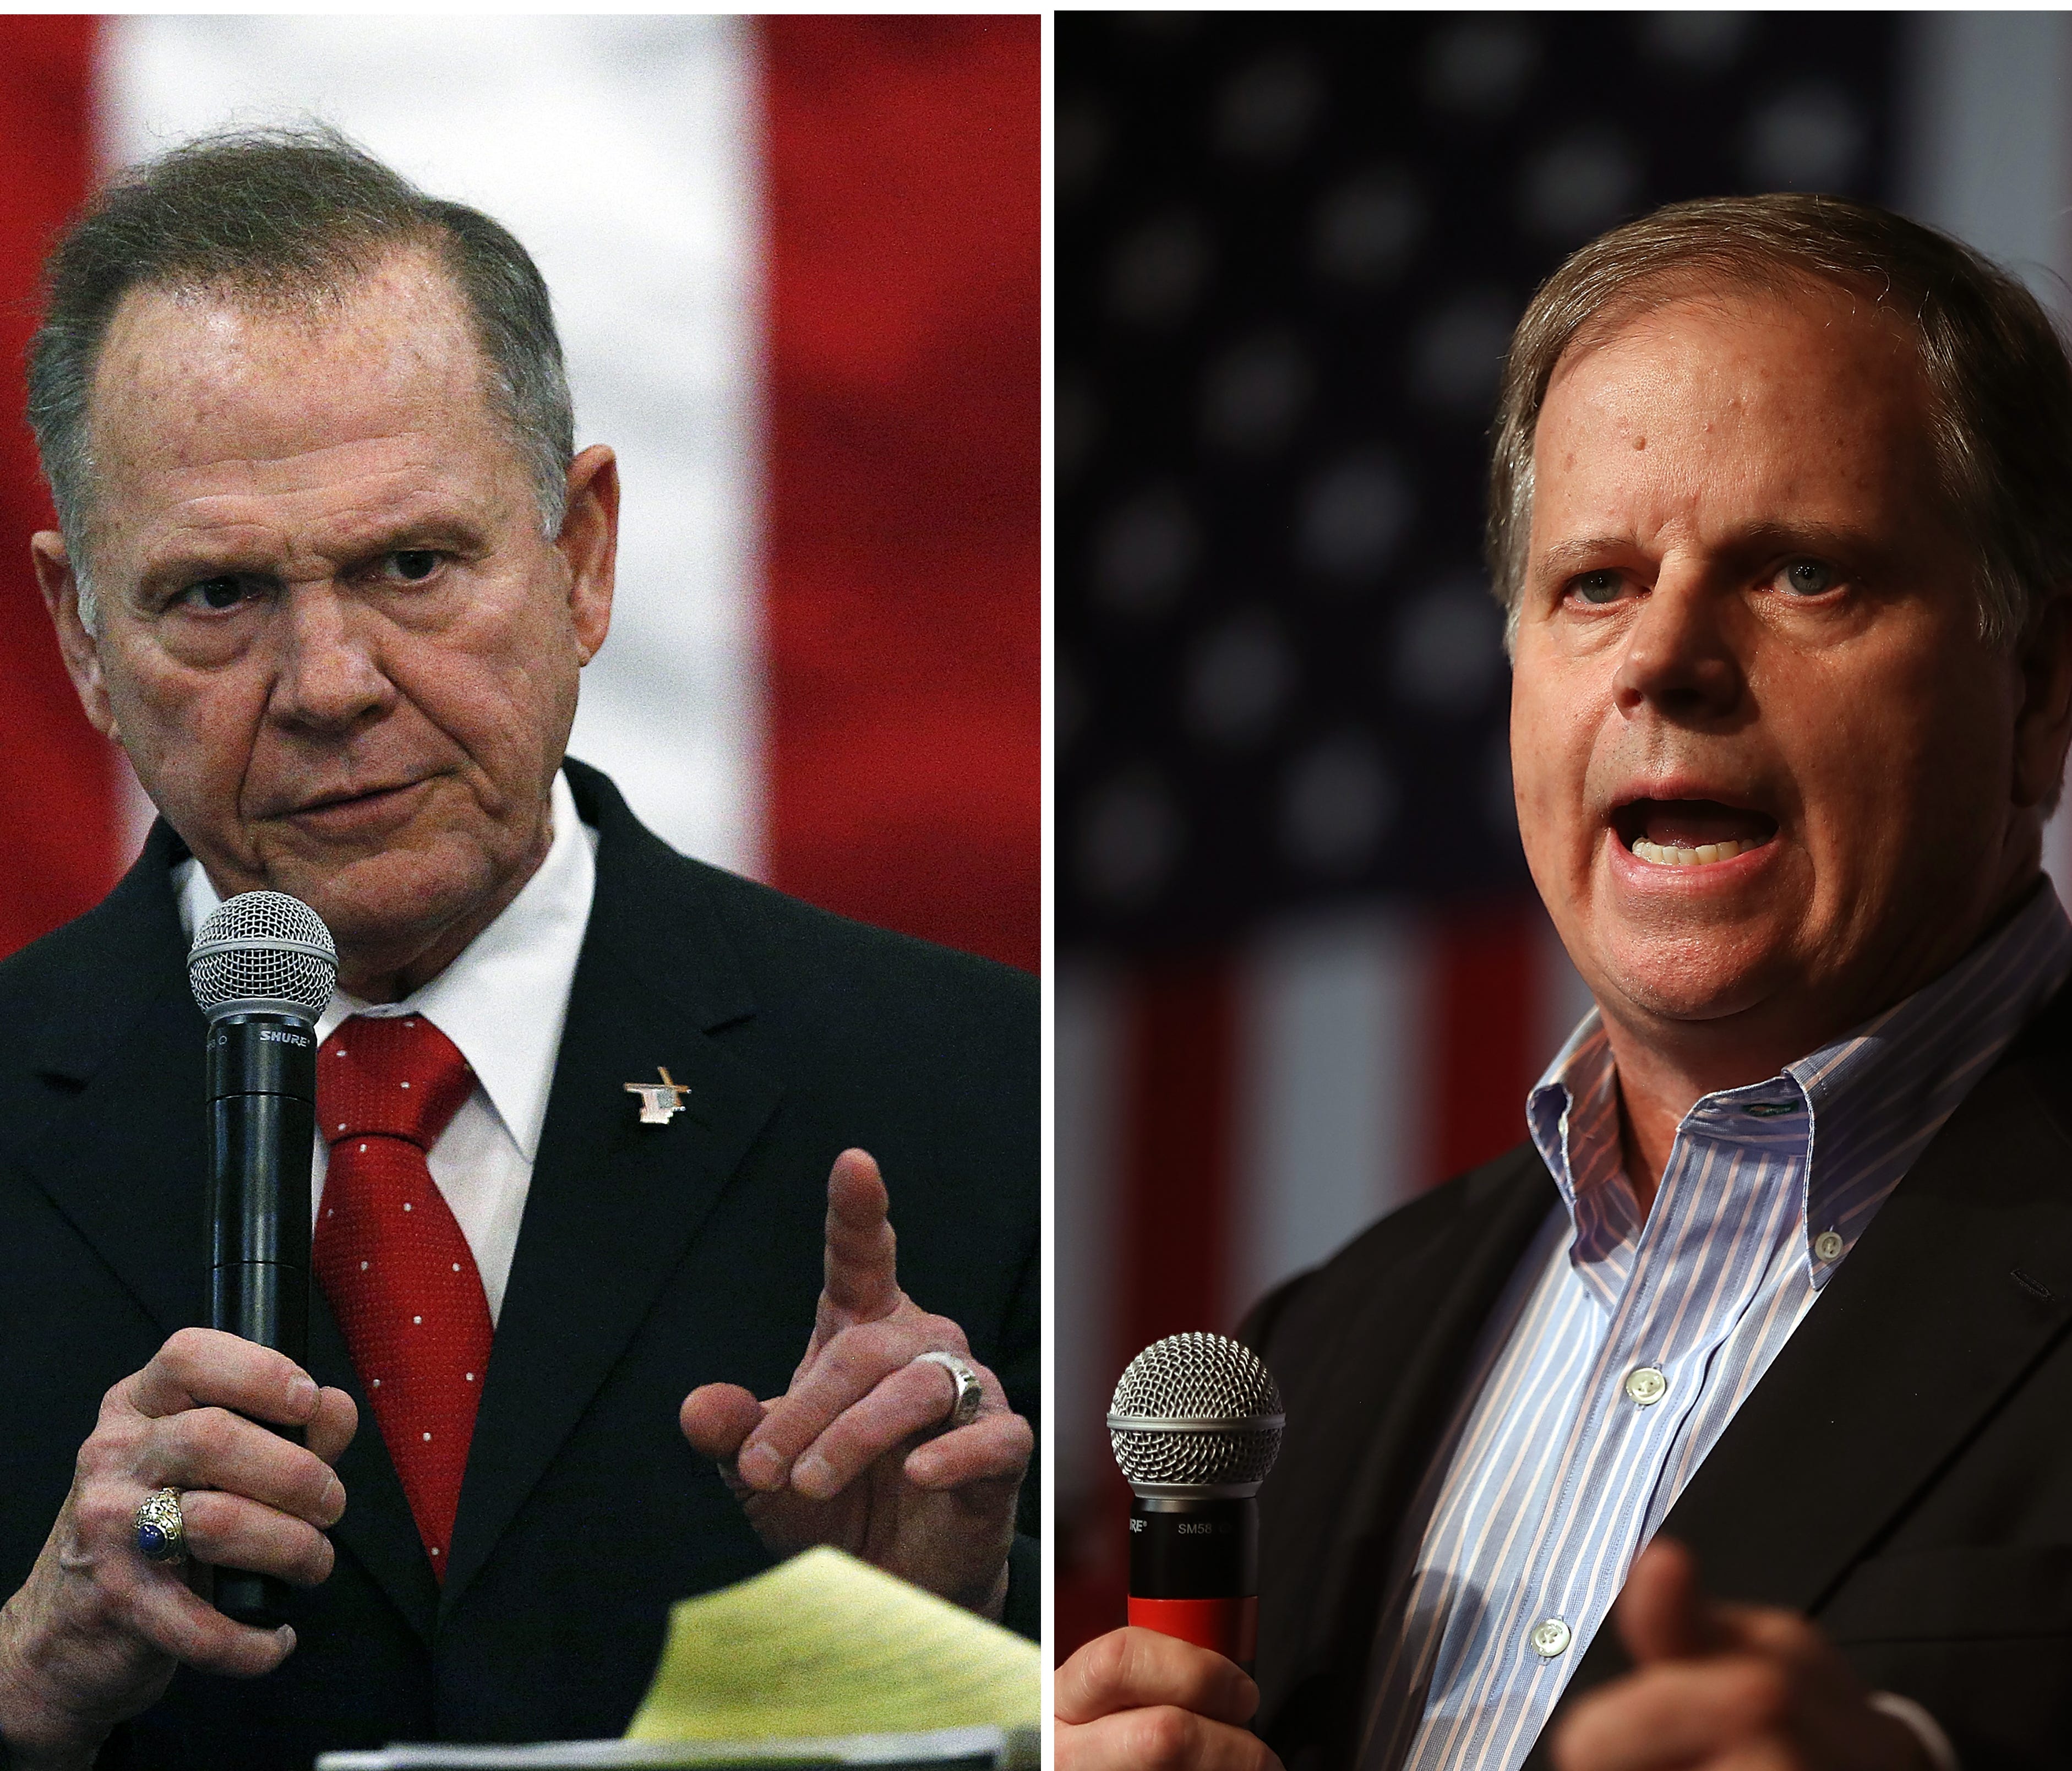 Republican Roy Moore and Democrat Doug Jones are vying for the U.S. Senate seat once held by Jeff Sessions, now attorney general in the Trump administration.